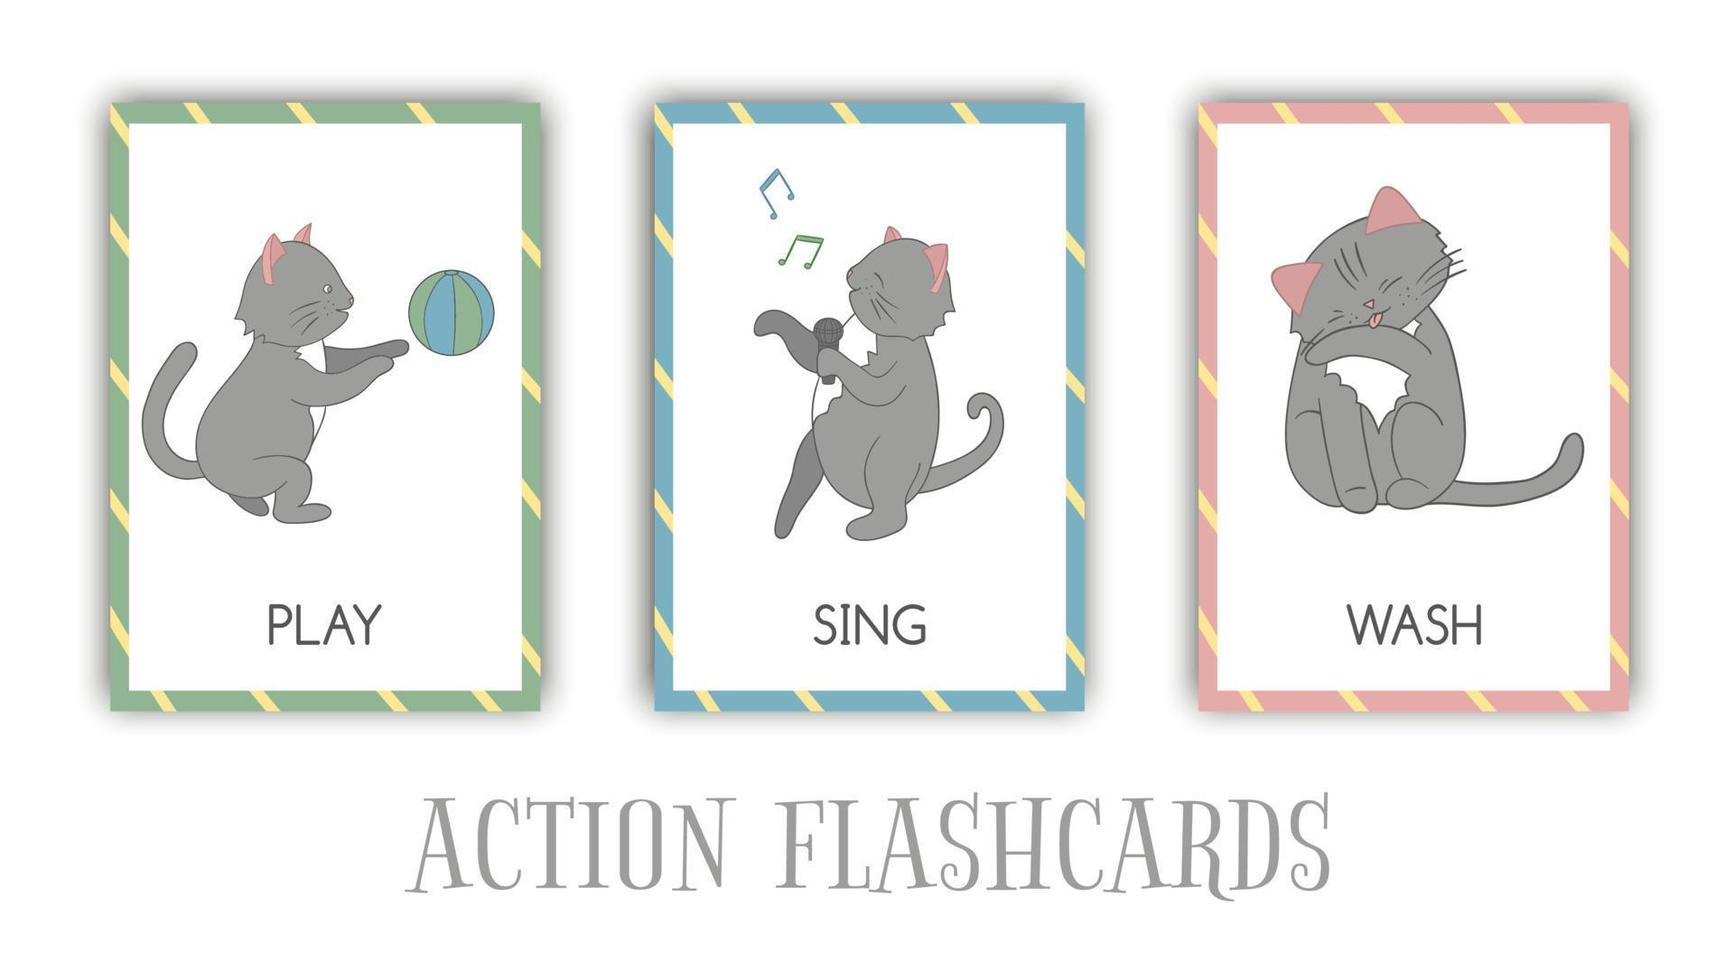 Vector set of actions flash cards with cat. Cute character playing, singing, washing. Cards for early learning.